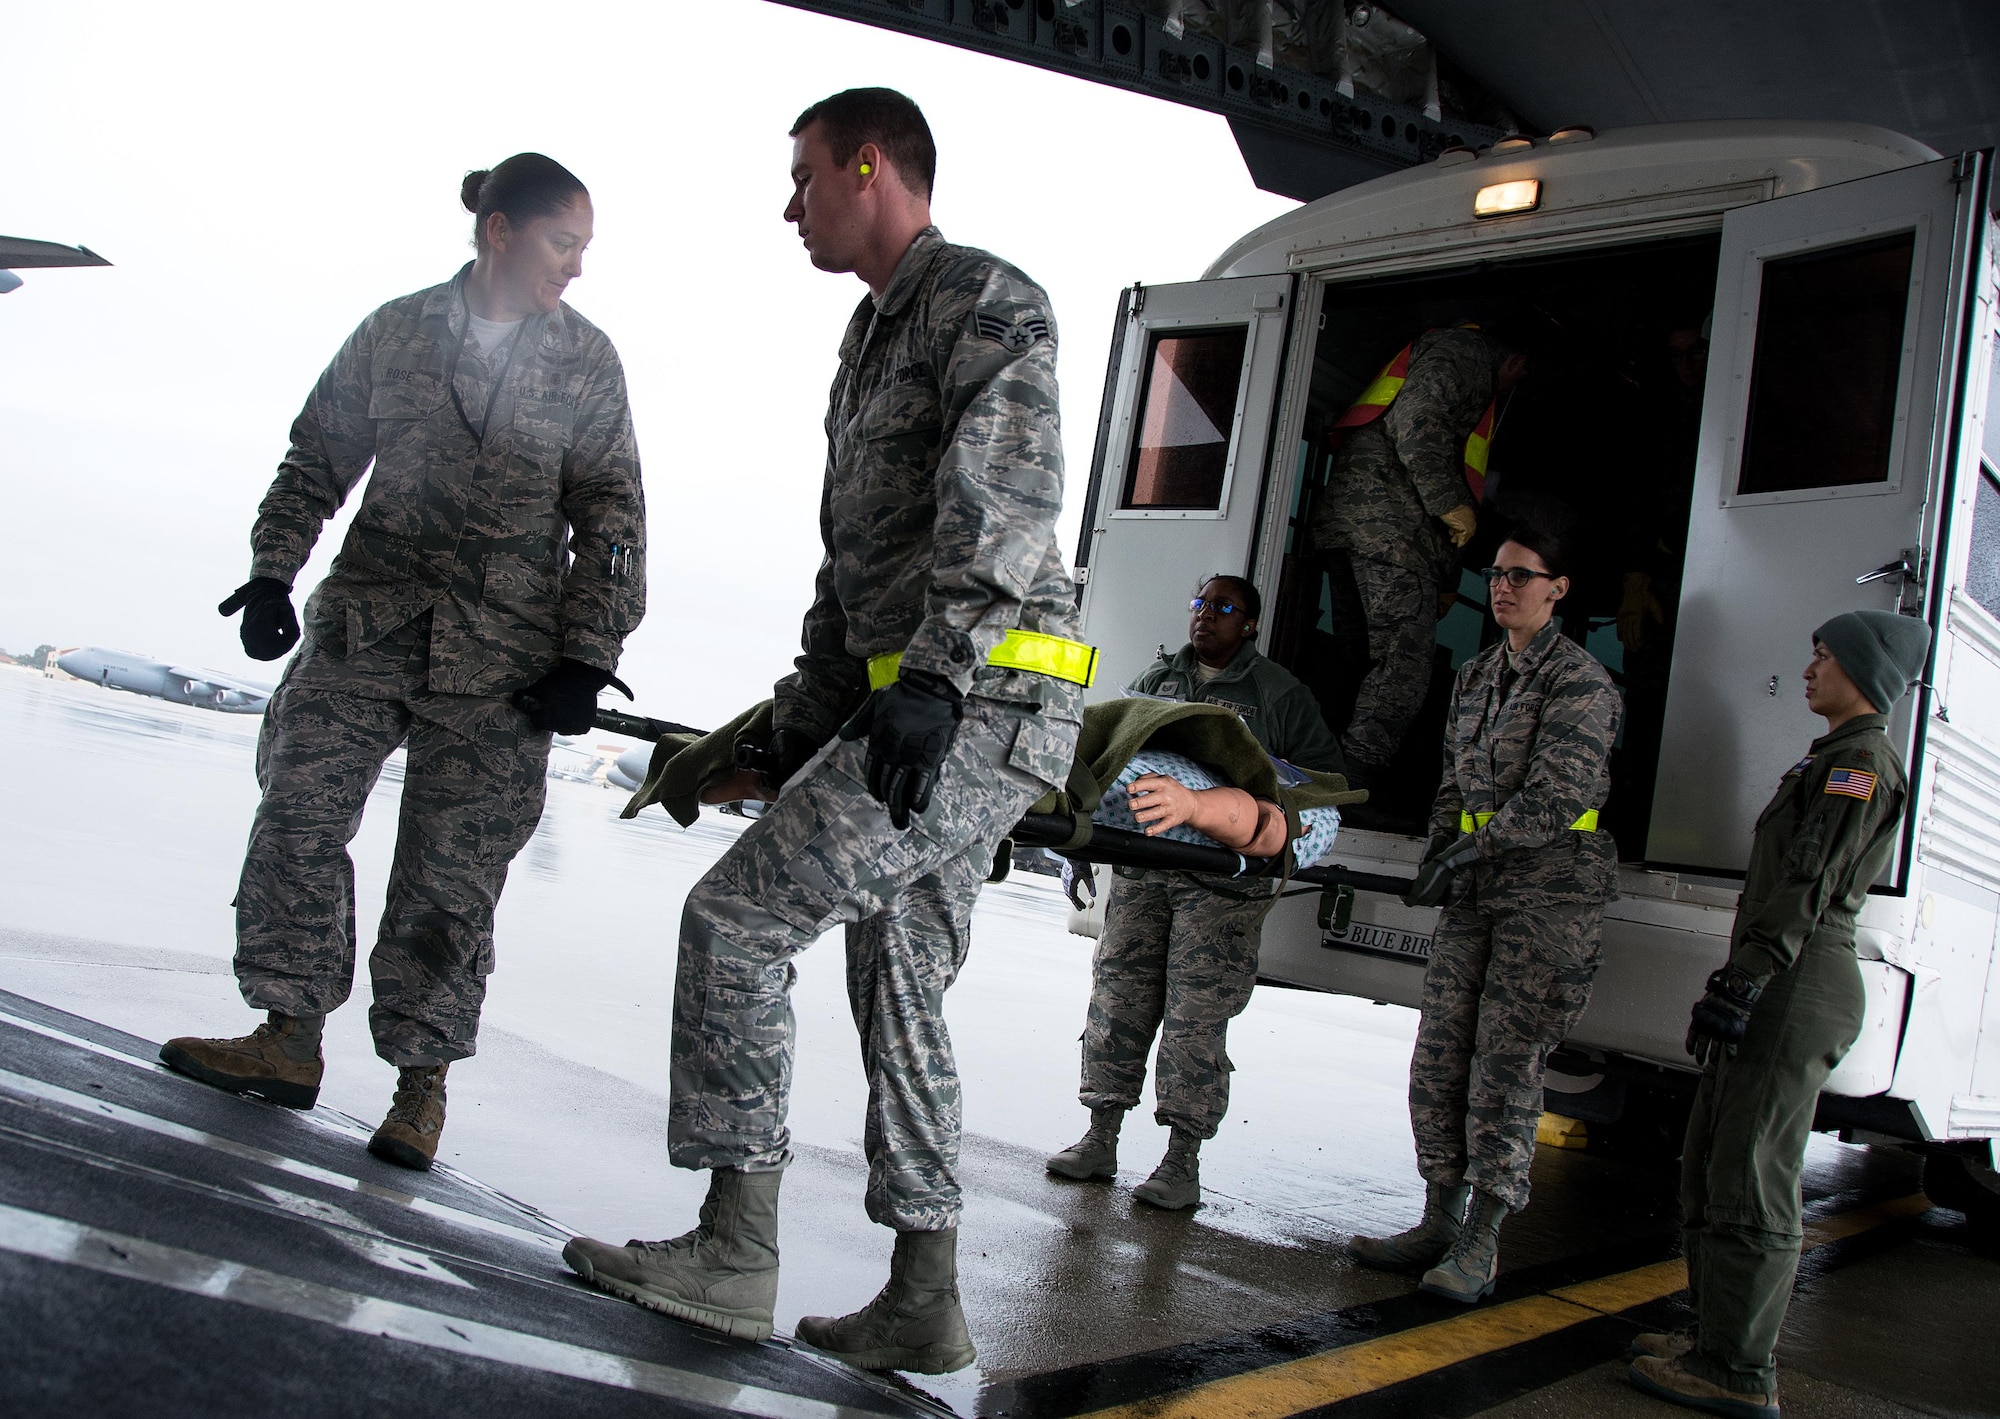 Patriot Delta participants carry a litter with a medical manikin patient off of an ambulance bus onto a C-17 Globemaster III during Patriot Delta at Travis Air Force Base, Calif. on March 24, 2017. Patriot Delta brought in aeromedical evacuations squadrons from the from the 911th Airlift Wing at Pittsburgh Air Reserve Station, Penn., the 908th AW at Maxwell Air Force Base, Miss.; the 932d Airlift Wing at Scott AFB, Ill.; and the 349th Air Mobility Wing at Travis AFB. (U.S. Air Force photo by Staff Sgt. Daniel Phelps)